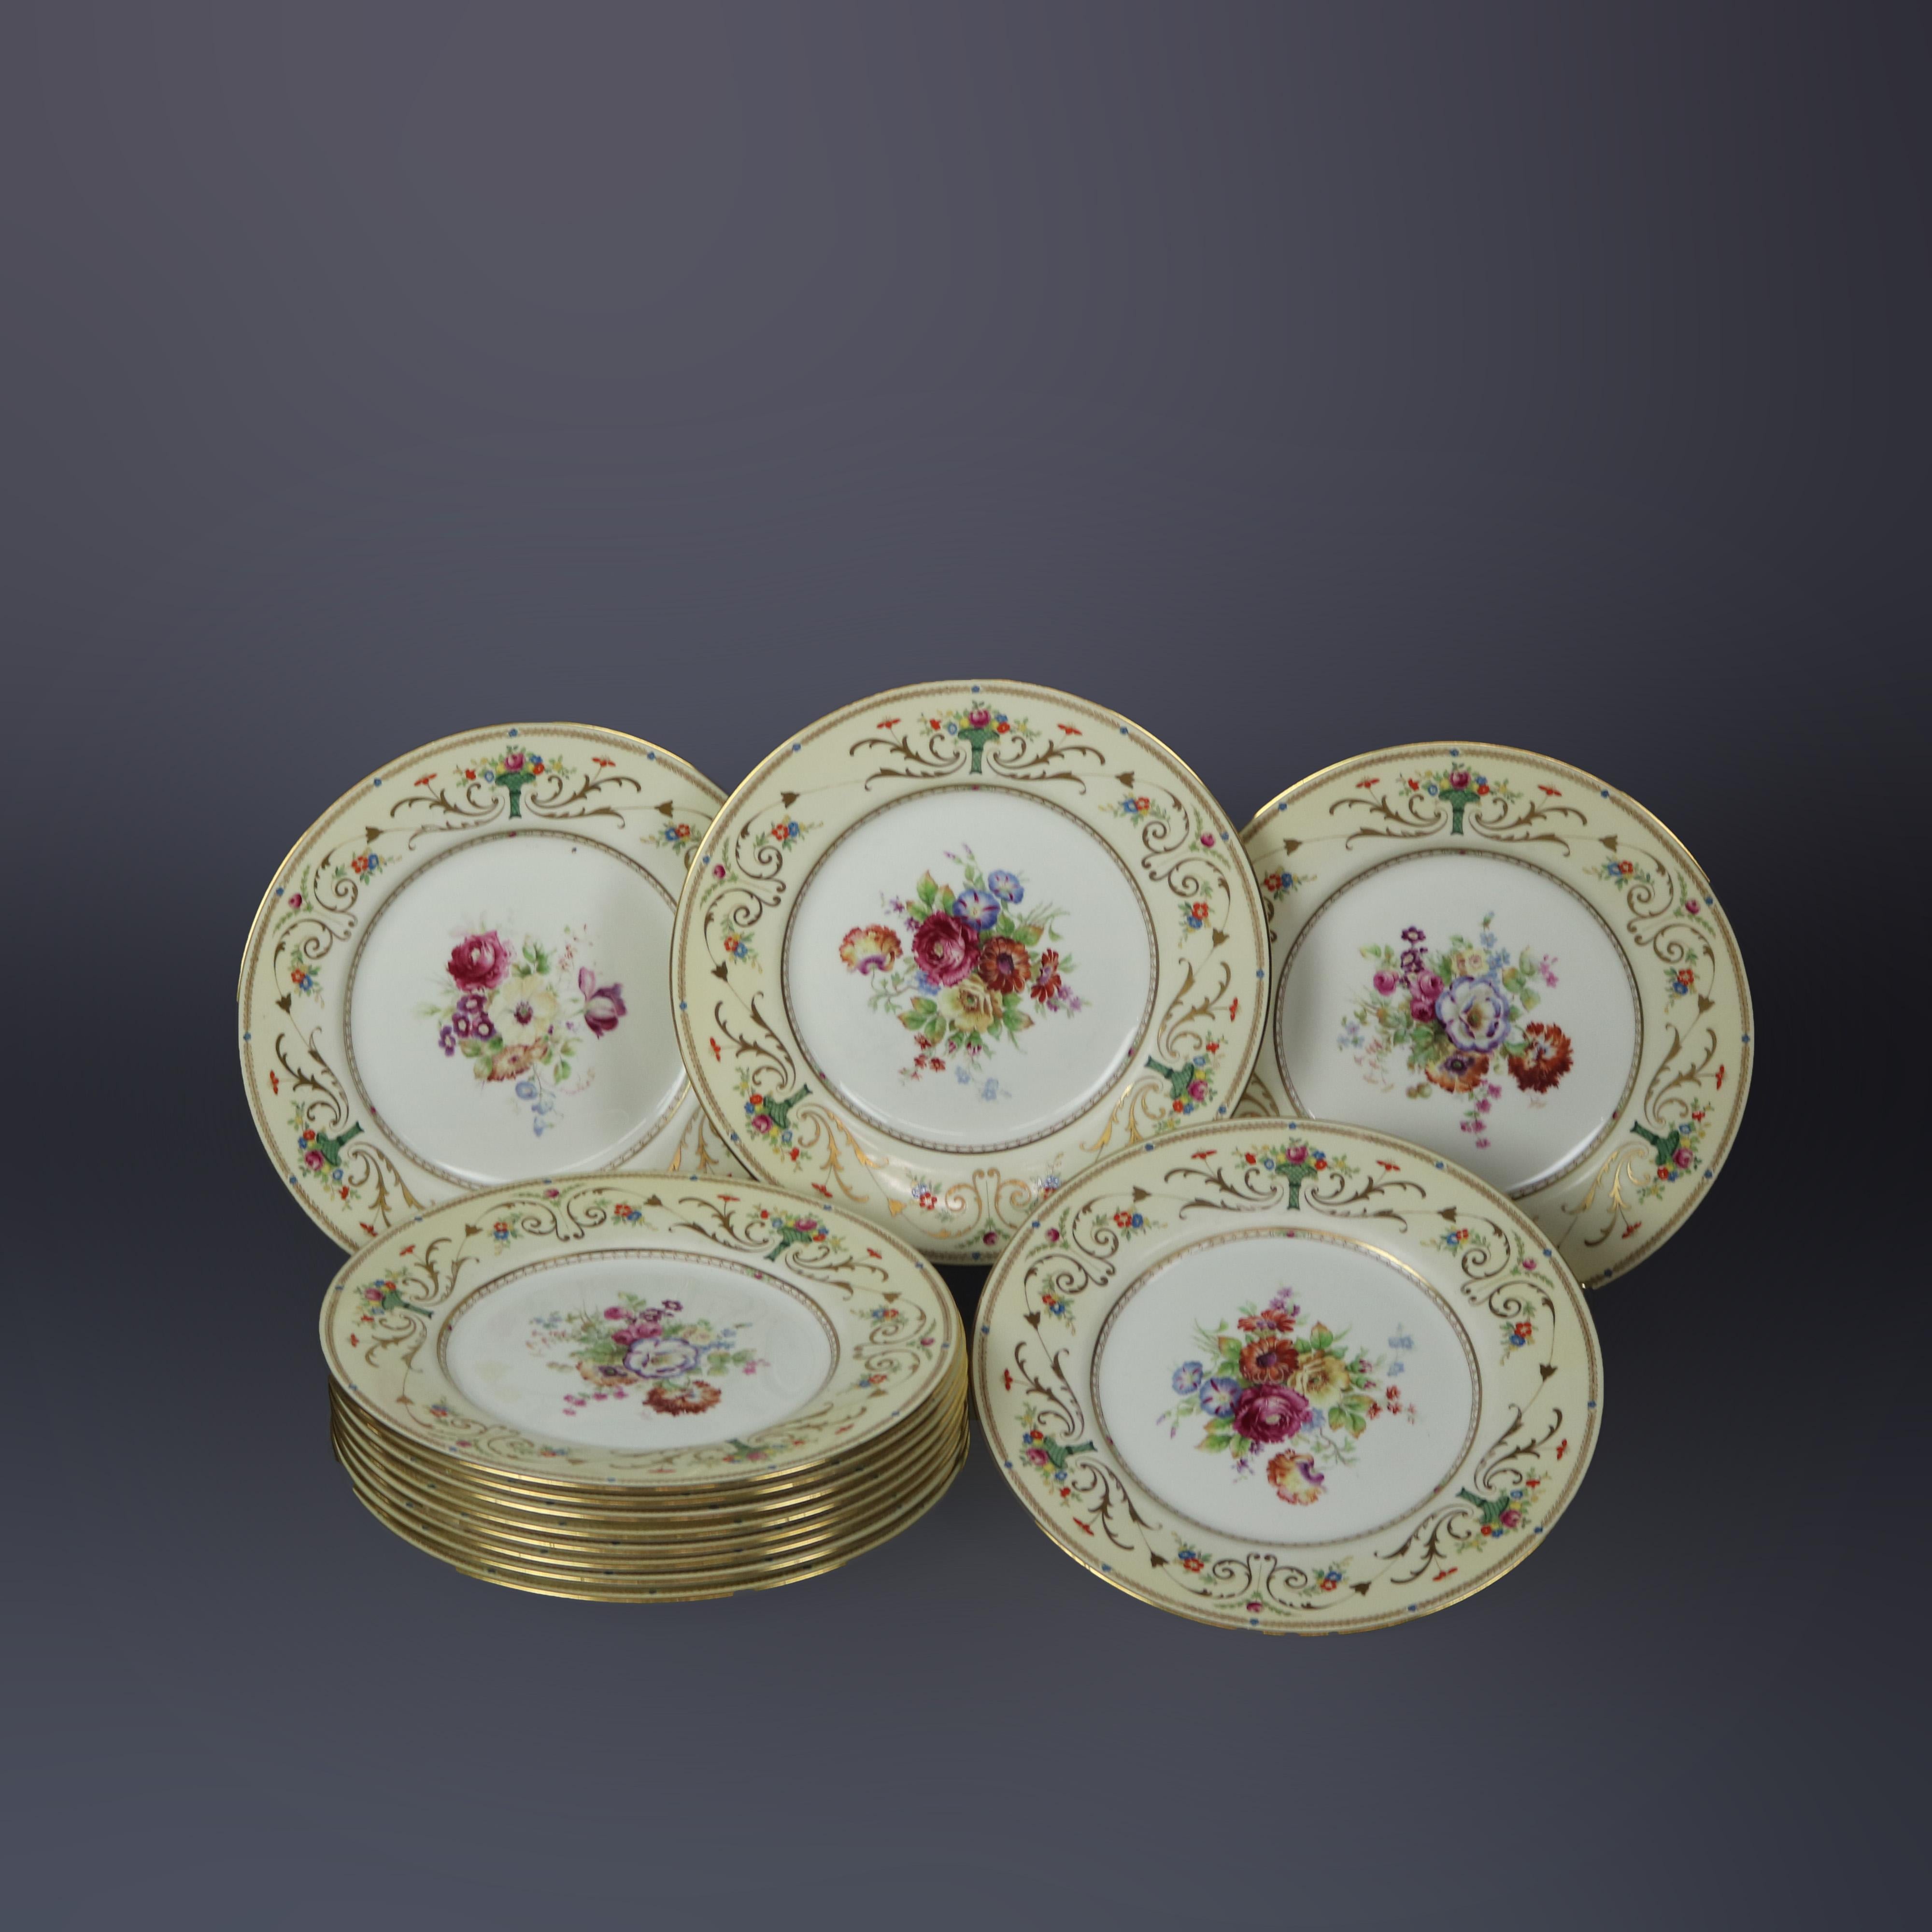 A set of twelve English dinner plates by Royal Doulton offer bone china construction with well having hand painted floral reserve with rim having repeating panier de fleurs and gilt scroll and foliate elements, en verso green maker mark stamp as